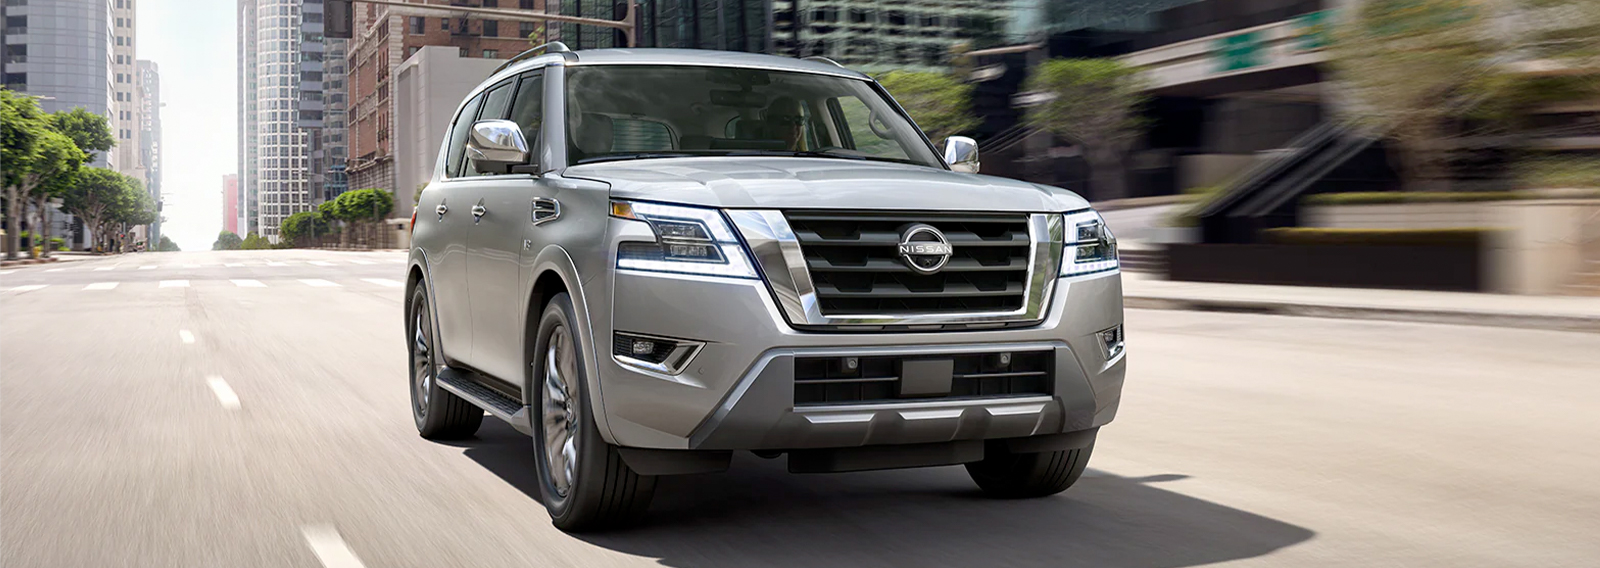 Front view of 2023 Nissan Armada driving down road.